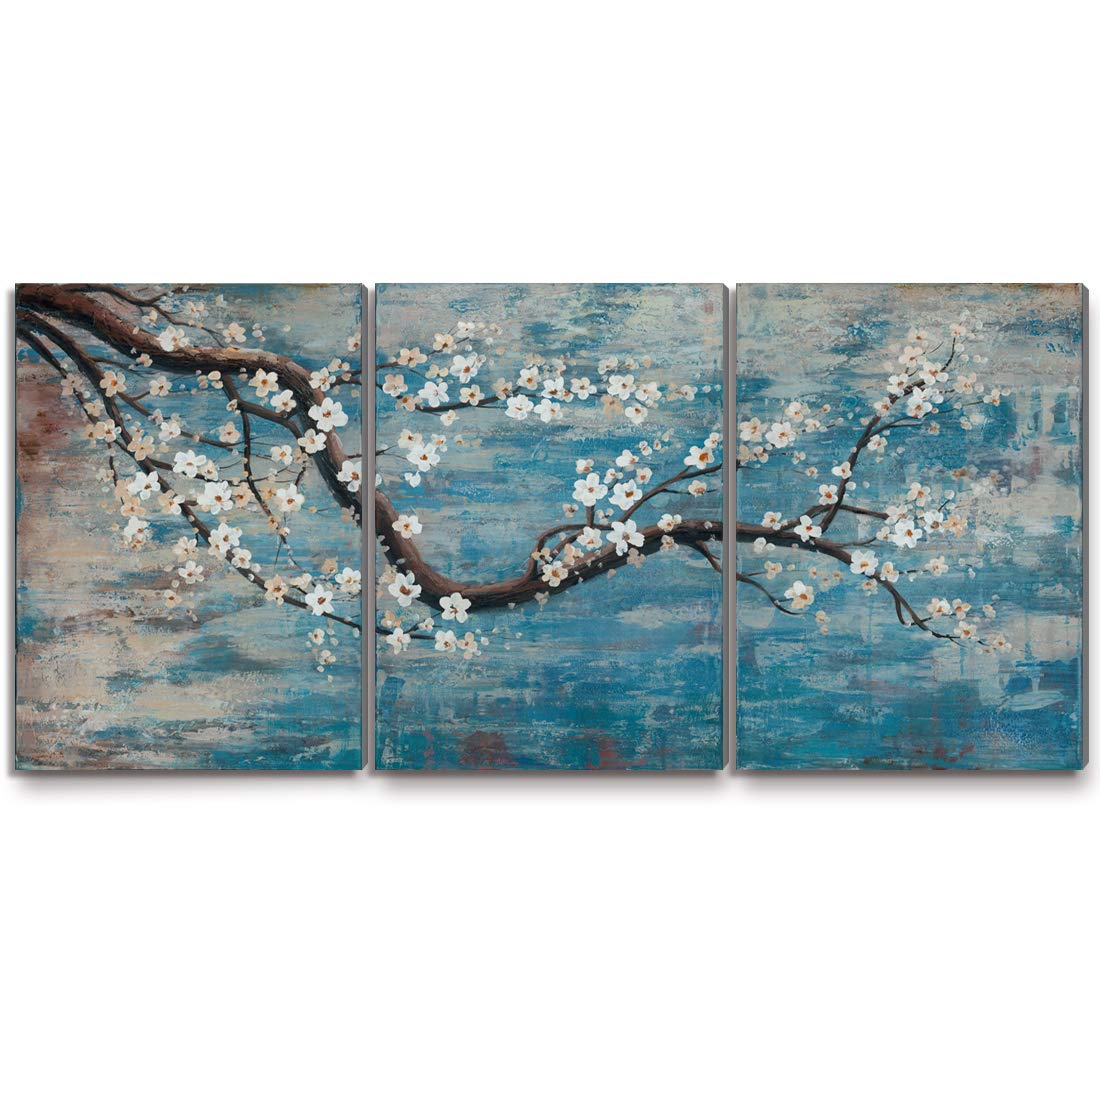 Extra Large Wall Art for Living Room 100% Hand-Painted Framed Decorative Floral Oil Painting Set Decorative Modern Blue Tree Artwork Ready to Hang 72